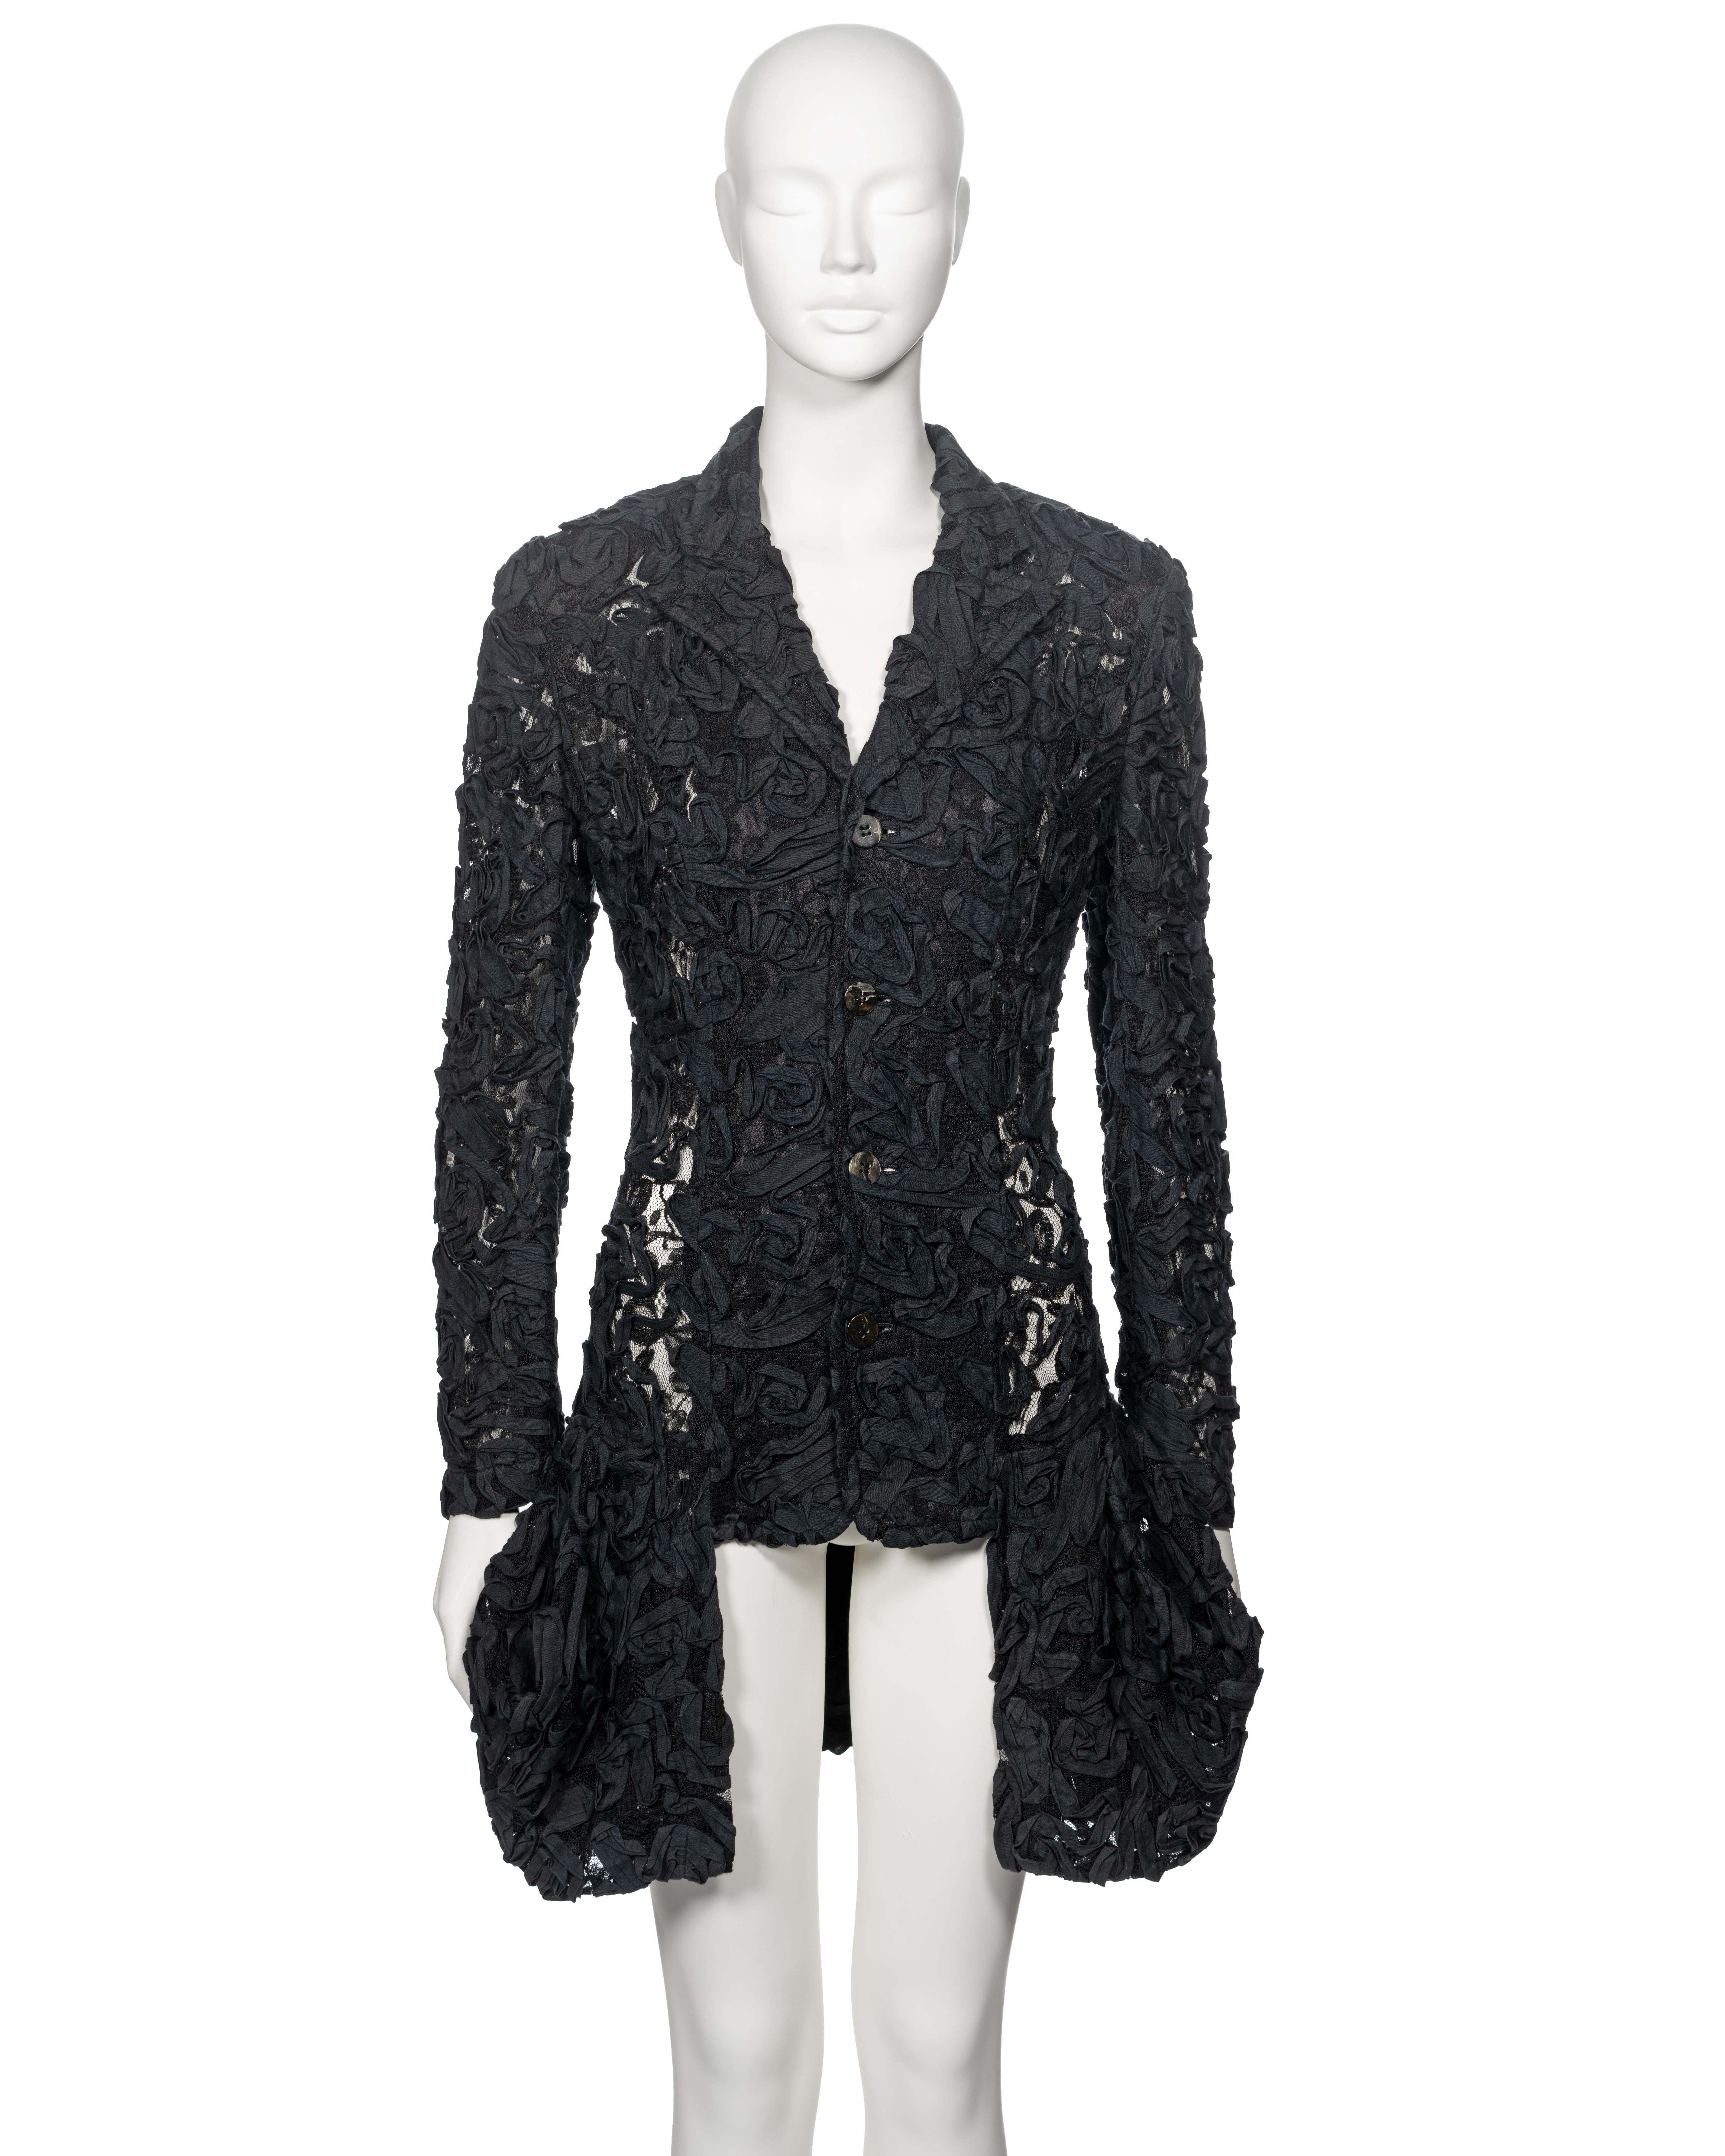 ▪ Archival Comme des Garçons Jacket 
▪ Spring-Summer 1987
▪ Sold by One of a Kind Archive
▪ Constructed from black lace 
▪ Cotton ribbon embroidery 
▪ Single breasted 
▪ Asymmetric bubble hem
▪ Unlined 
▪ Size: Small, please note, the sizing runs